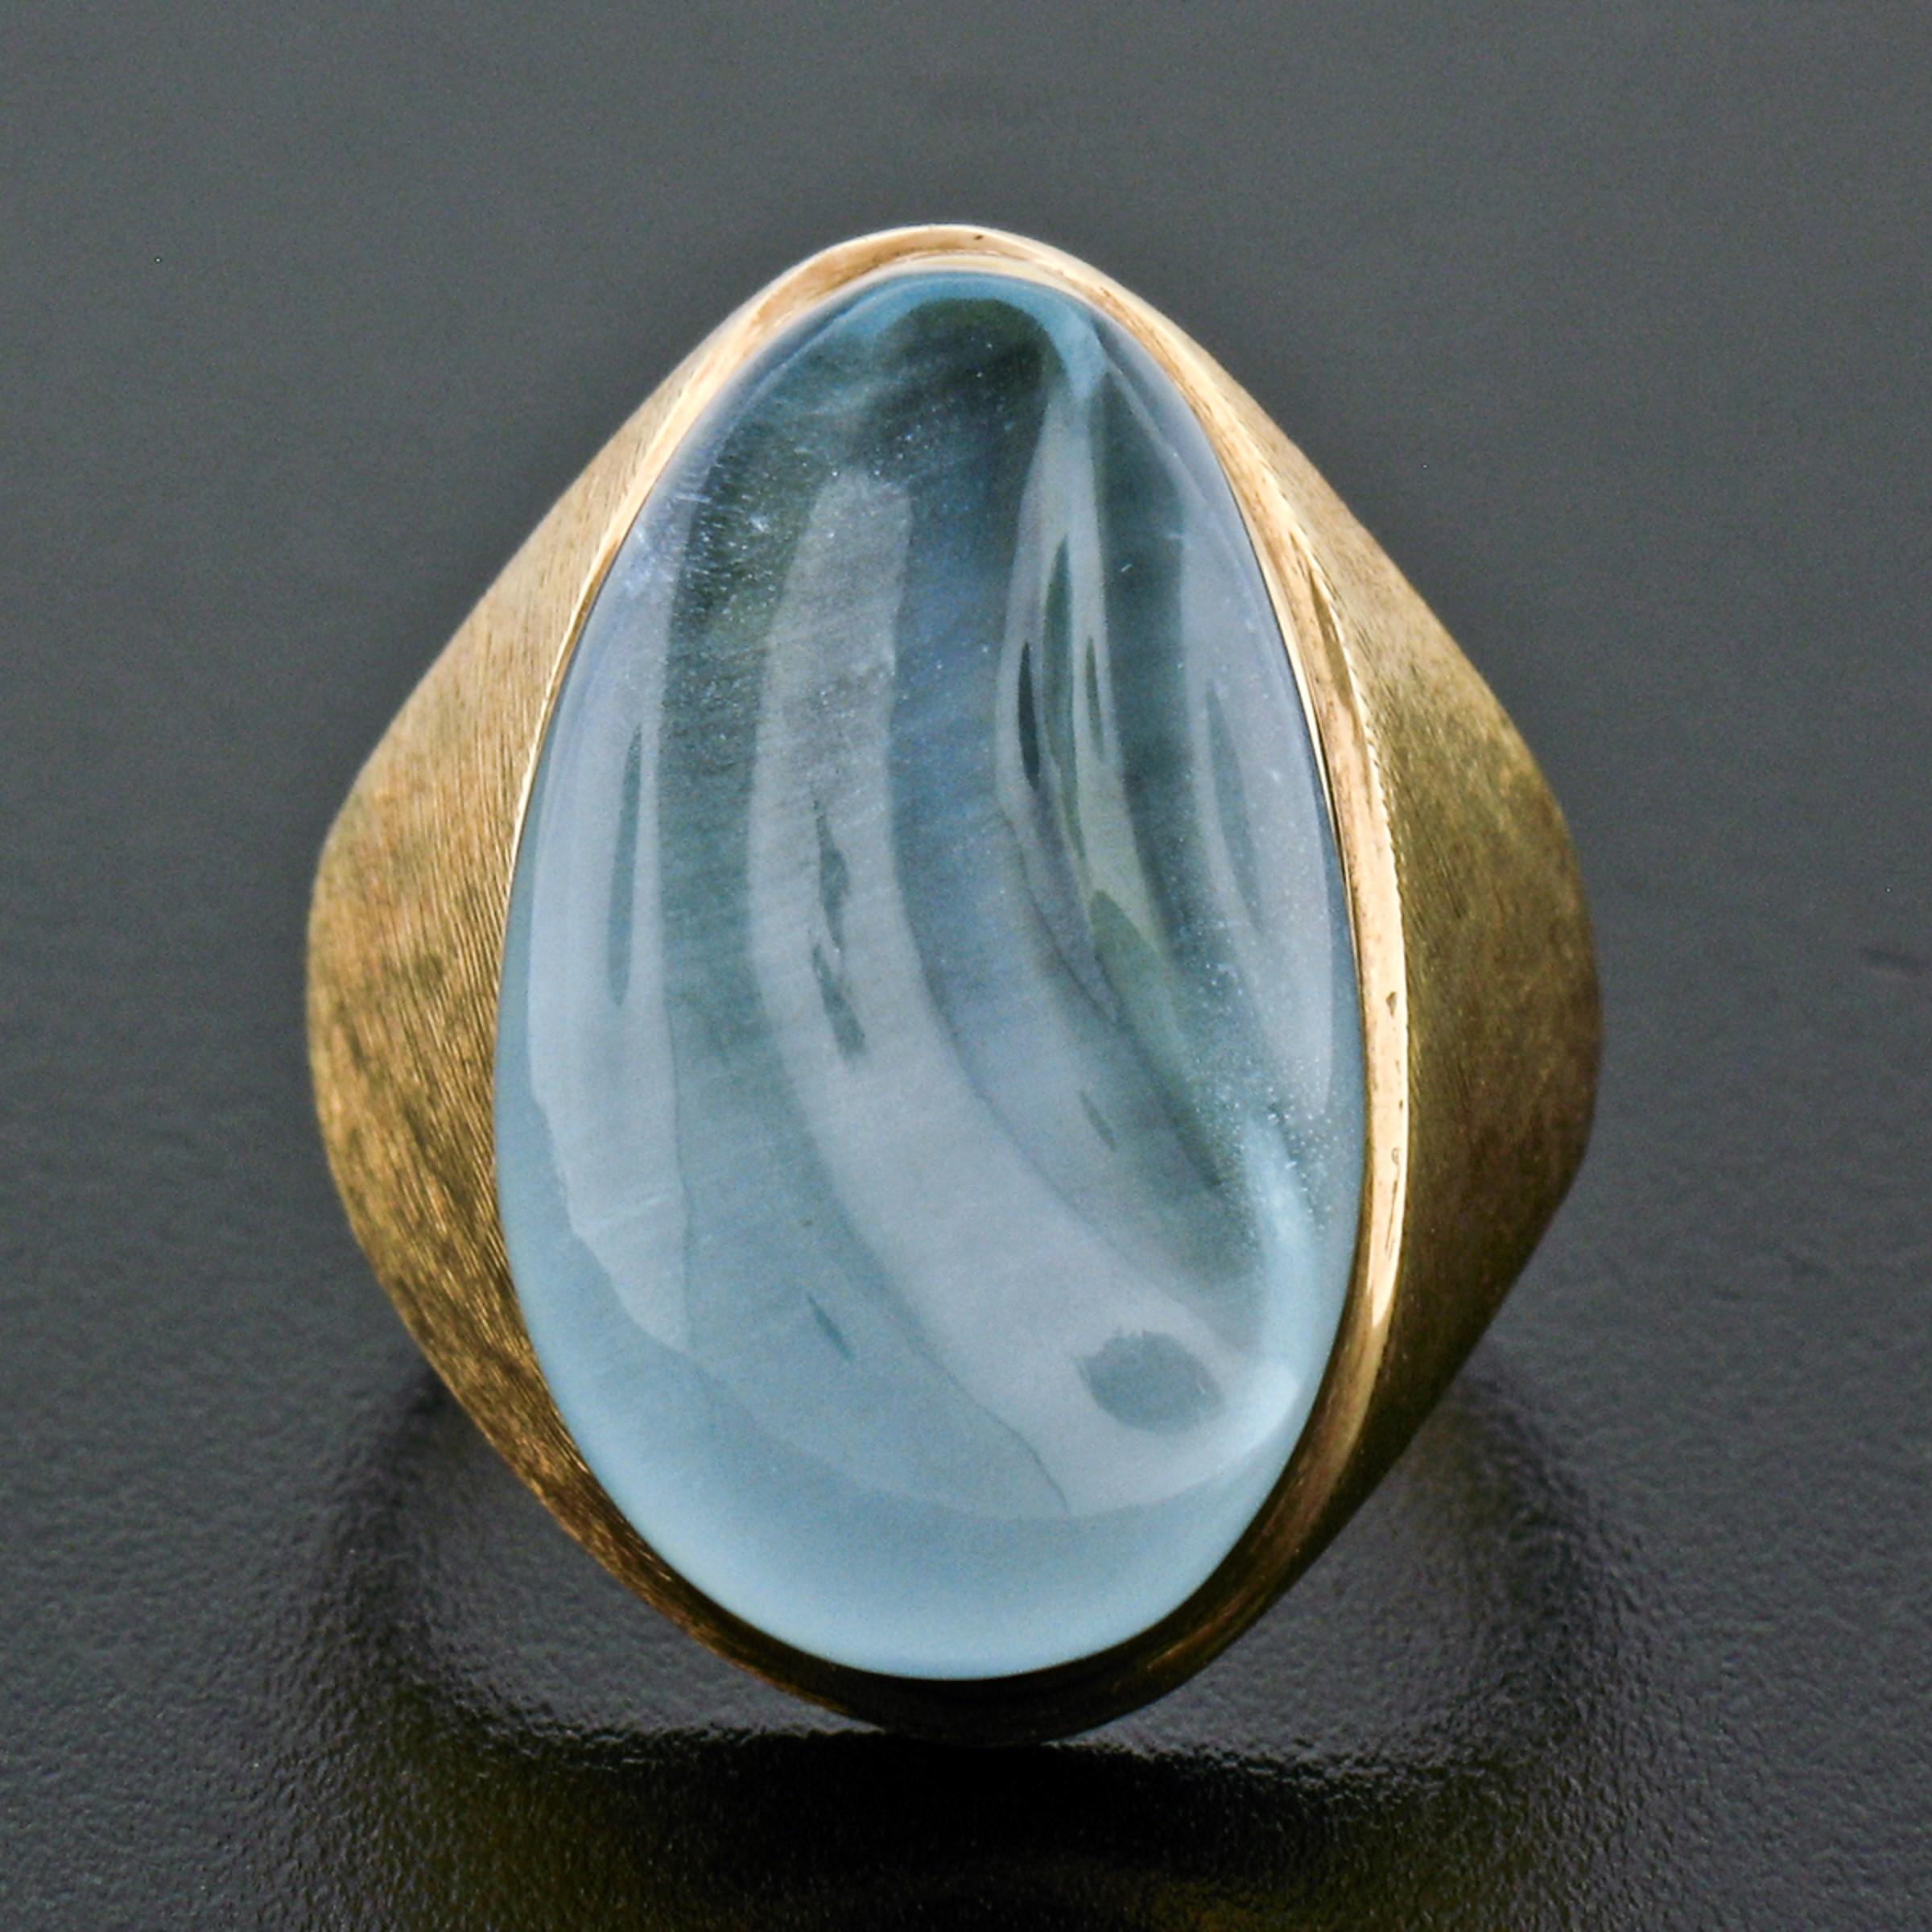 Here we have a rare, collectible modernist ring crafted in solid 18k yellow gold and designed by the famous Brazilian designer Burle Marx. The ring features a large, carved cabochon, natural aquamarine stone that displays the most lovely and